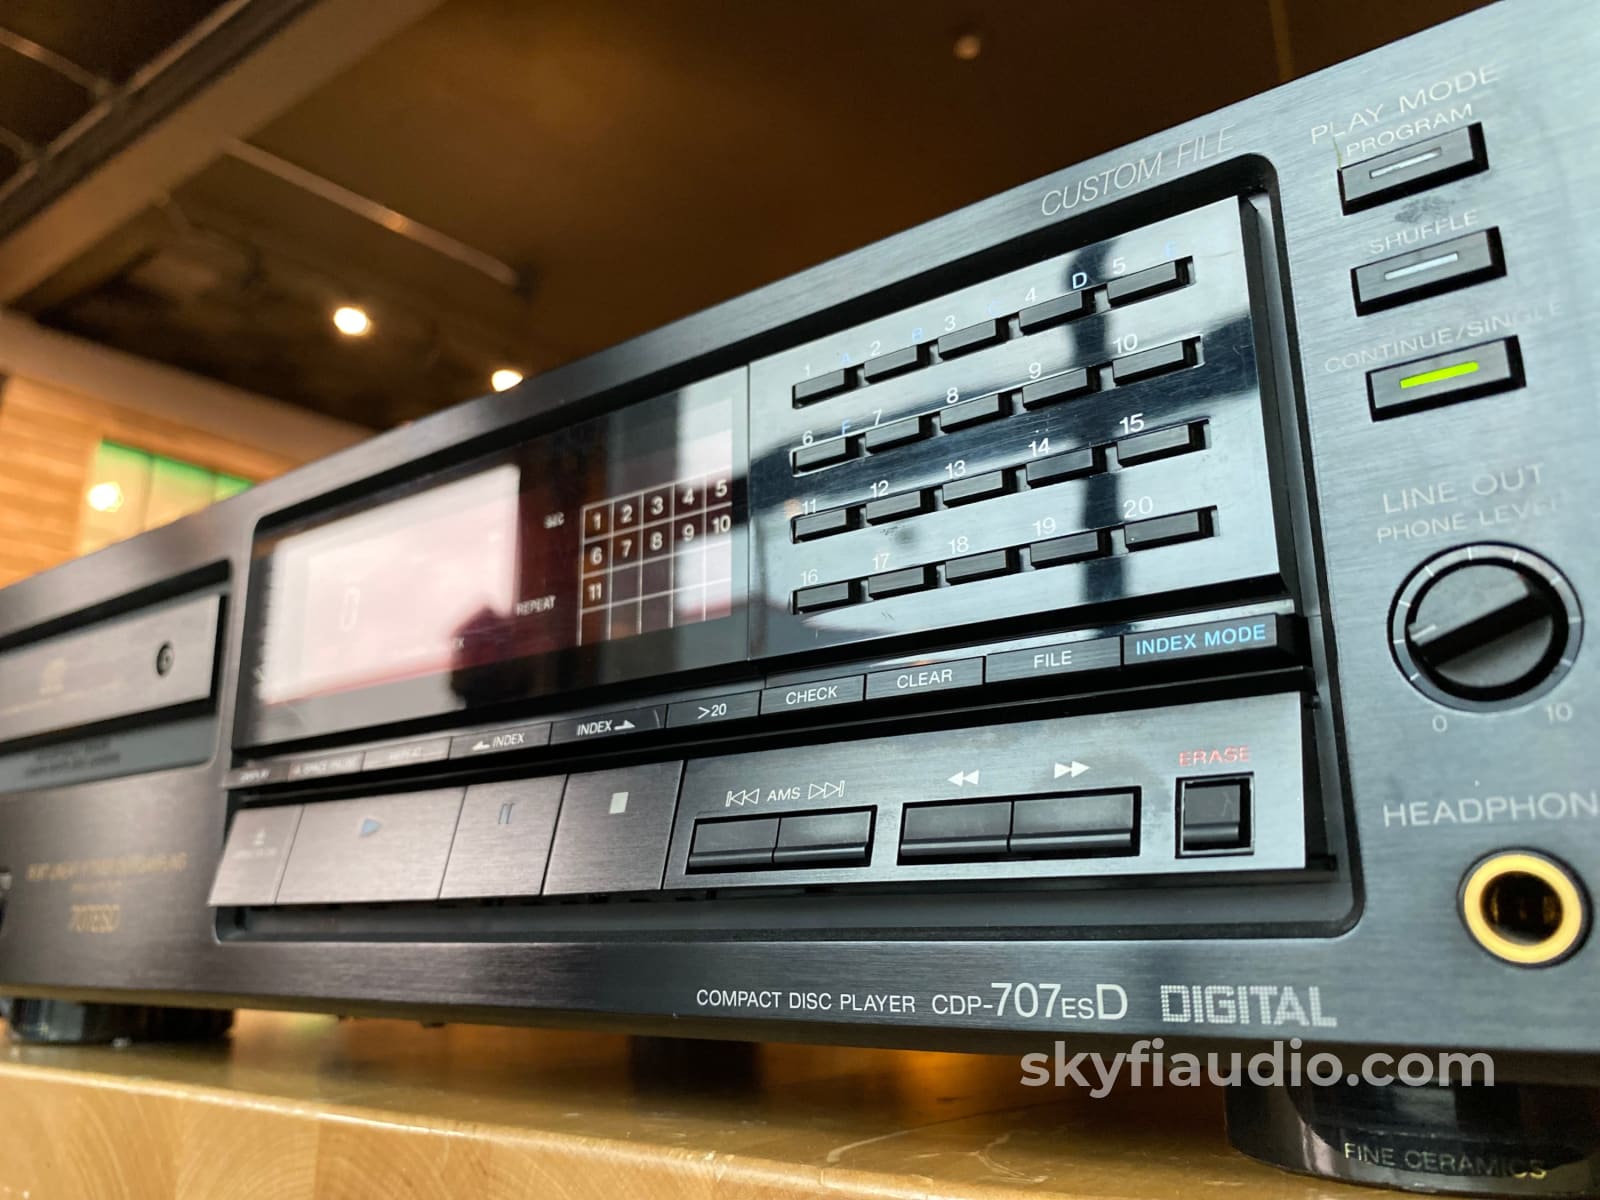 Sony Cdp-707Esd Vintage Cd Player With Remote - Our Favorite! + Digital